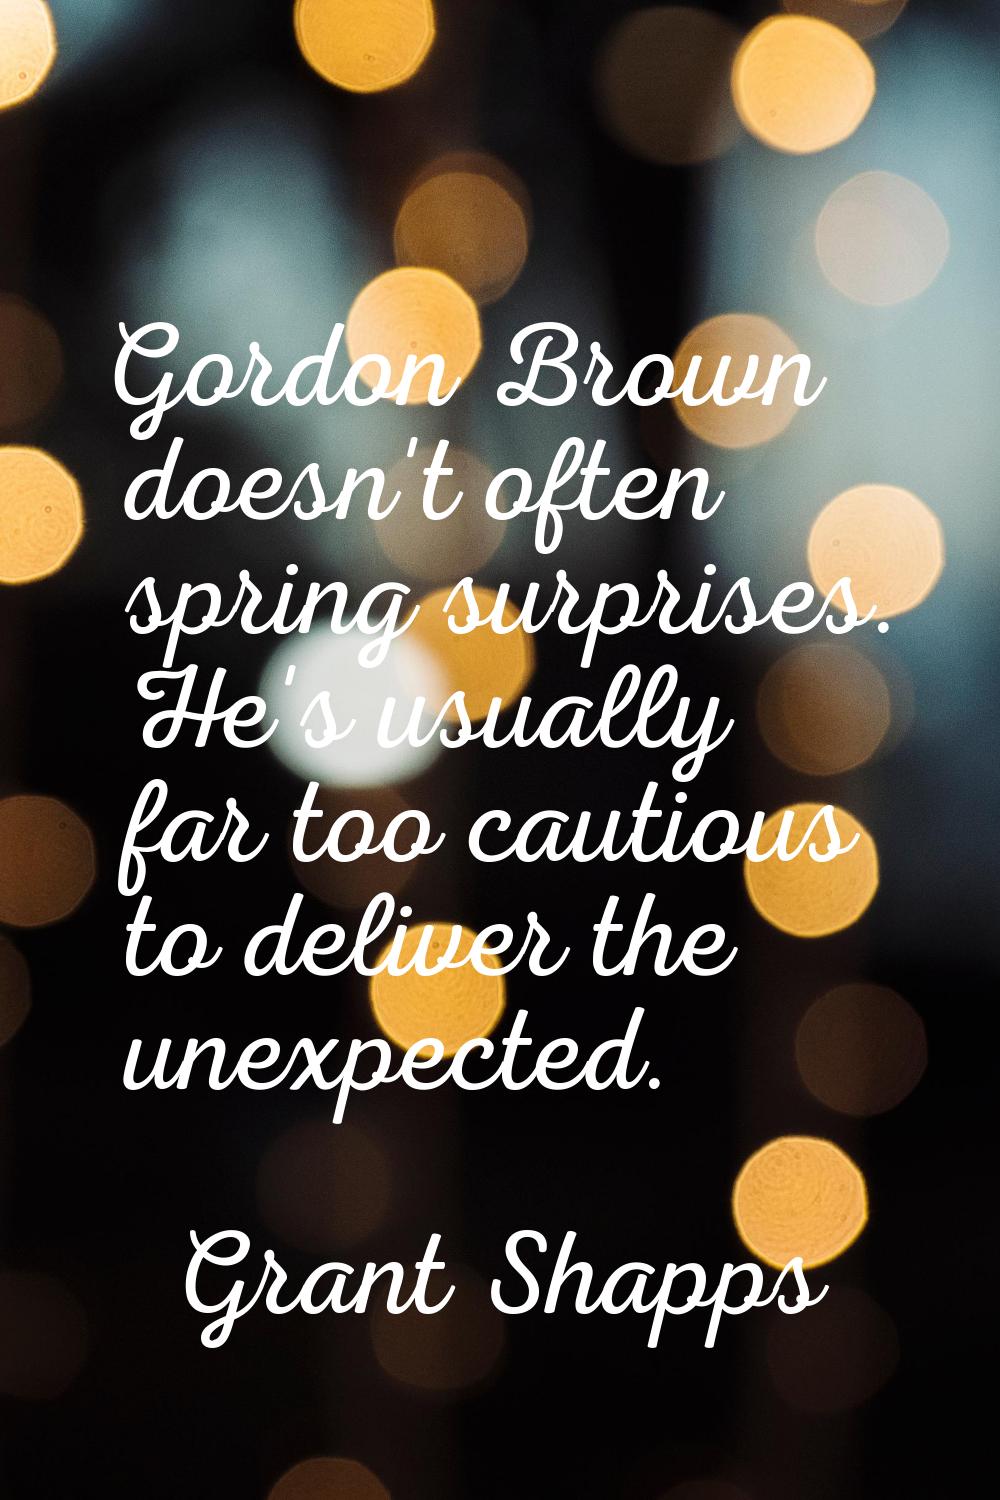 Gordon Brown doesn't often spring surprises. He's usually far too cautious to deliver the unexpecte